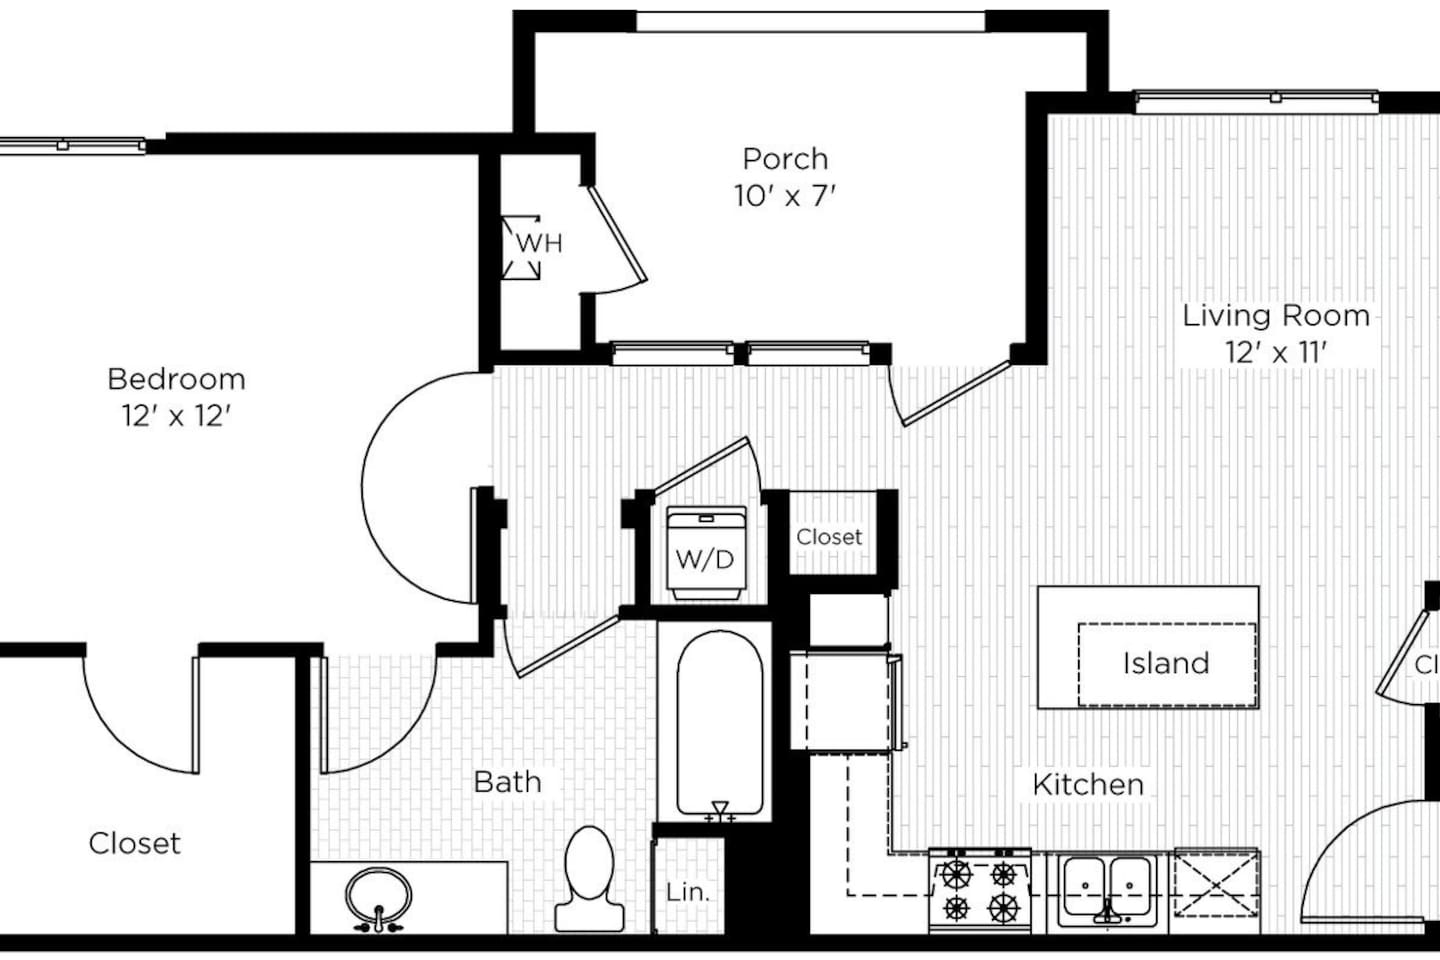 Floorplan diagram for The Aster North - 1DD, showing 1 bedroom